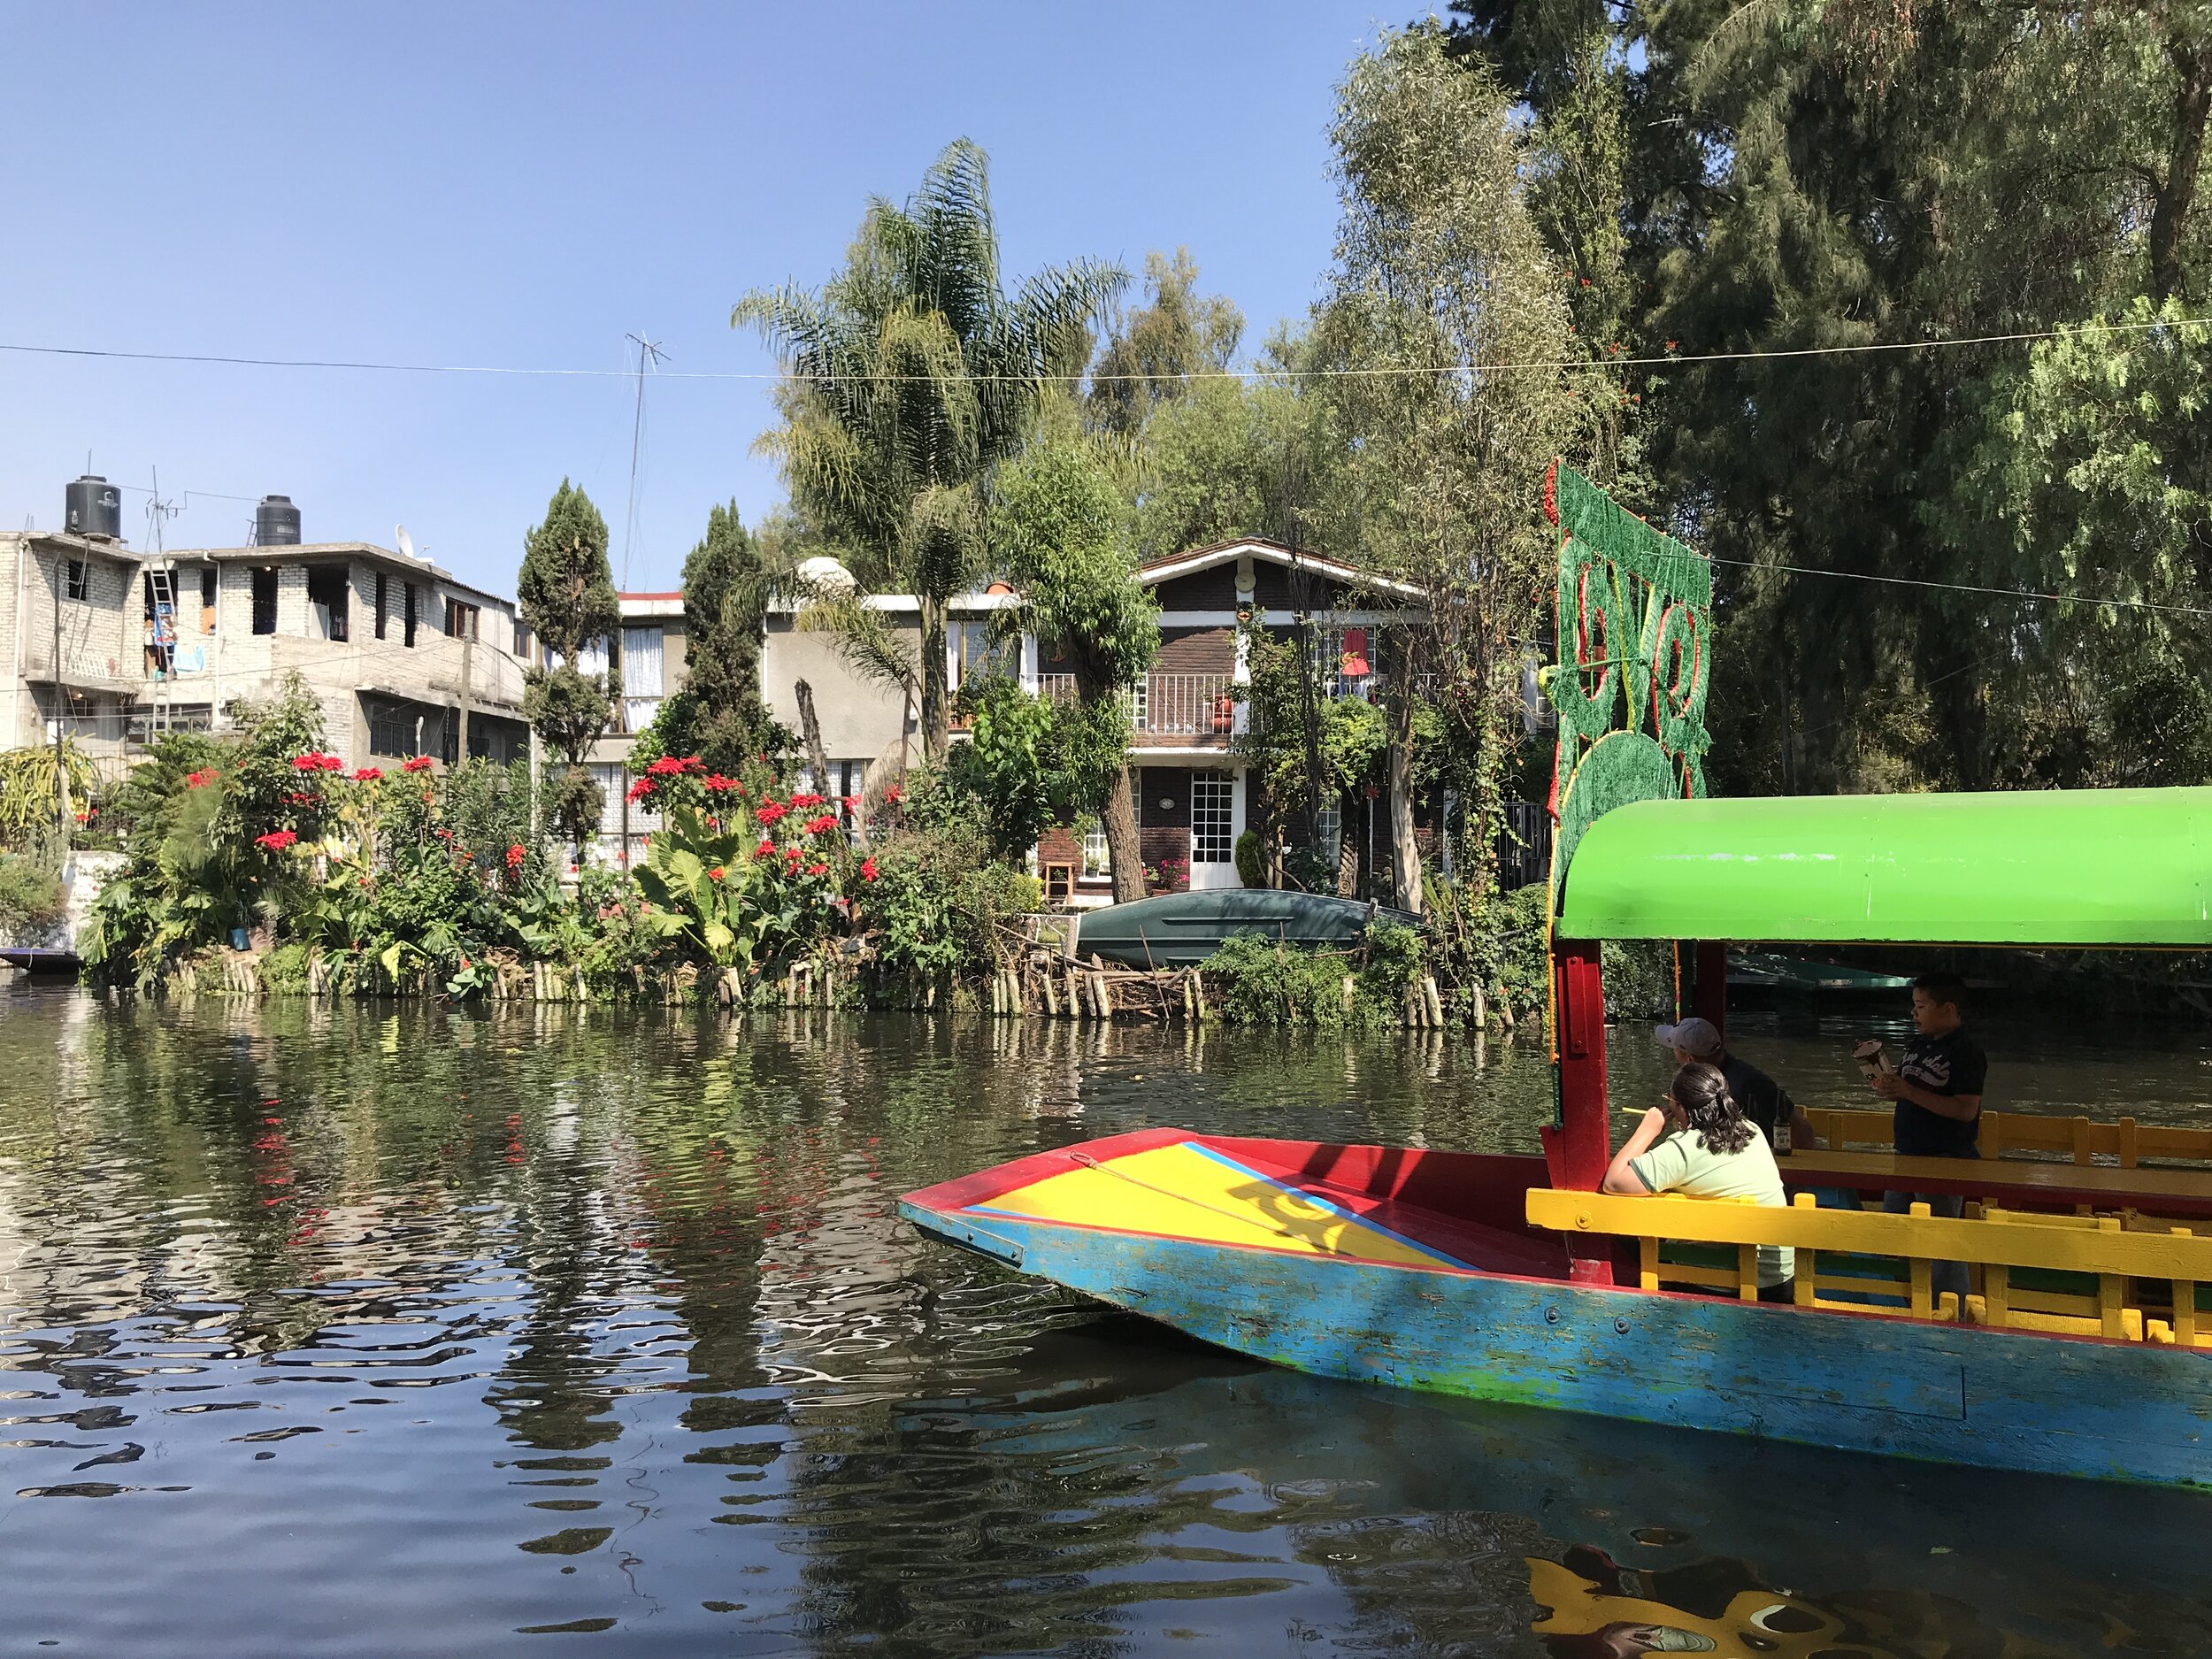 Floating gardens called chinampas line the waterways.